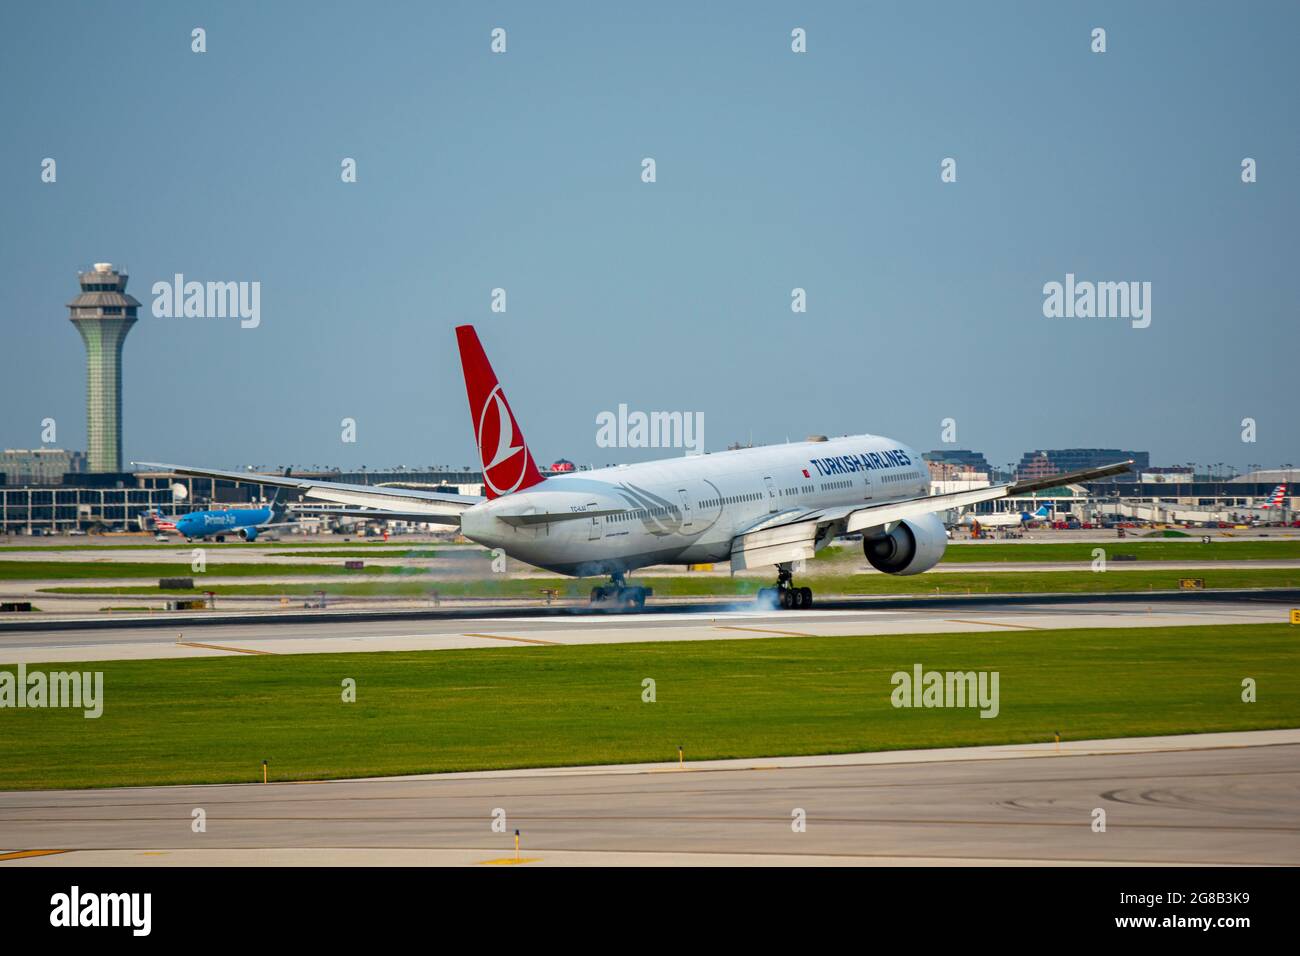 Chicago, IL, United States - July 18, 2021: Turkish Airlines Boeing 777-300ER (registration TV-LJJ) landing at Chicago O'Hare International Airport. Stock Photo